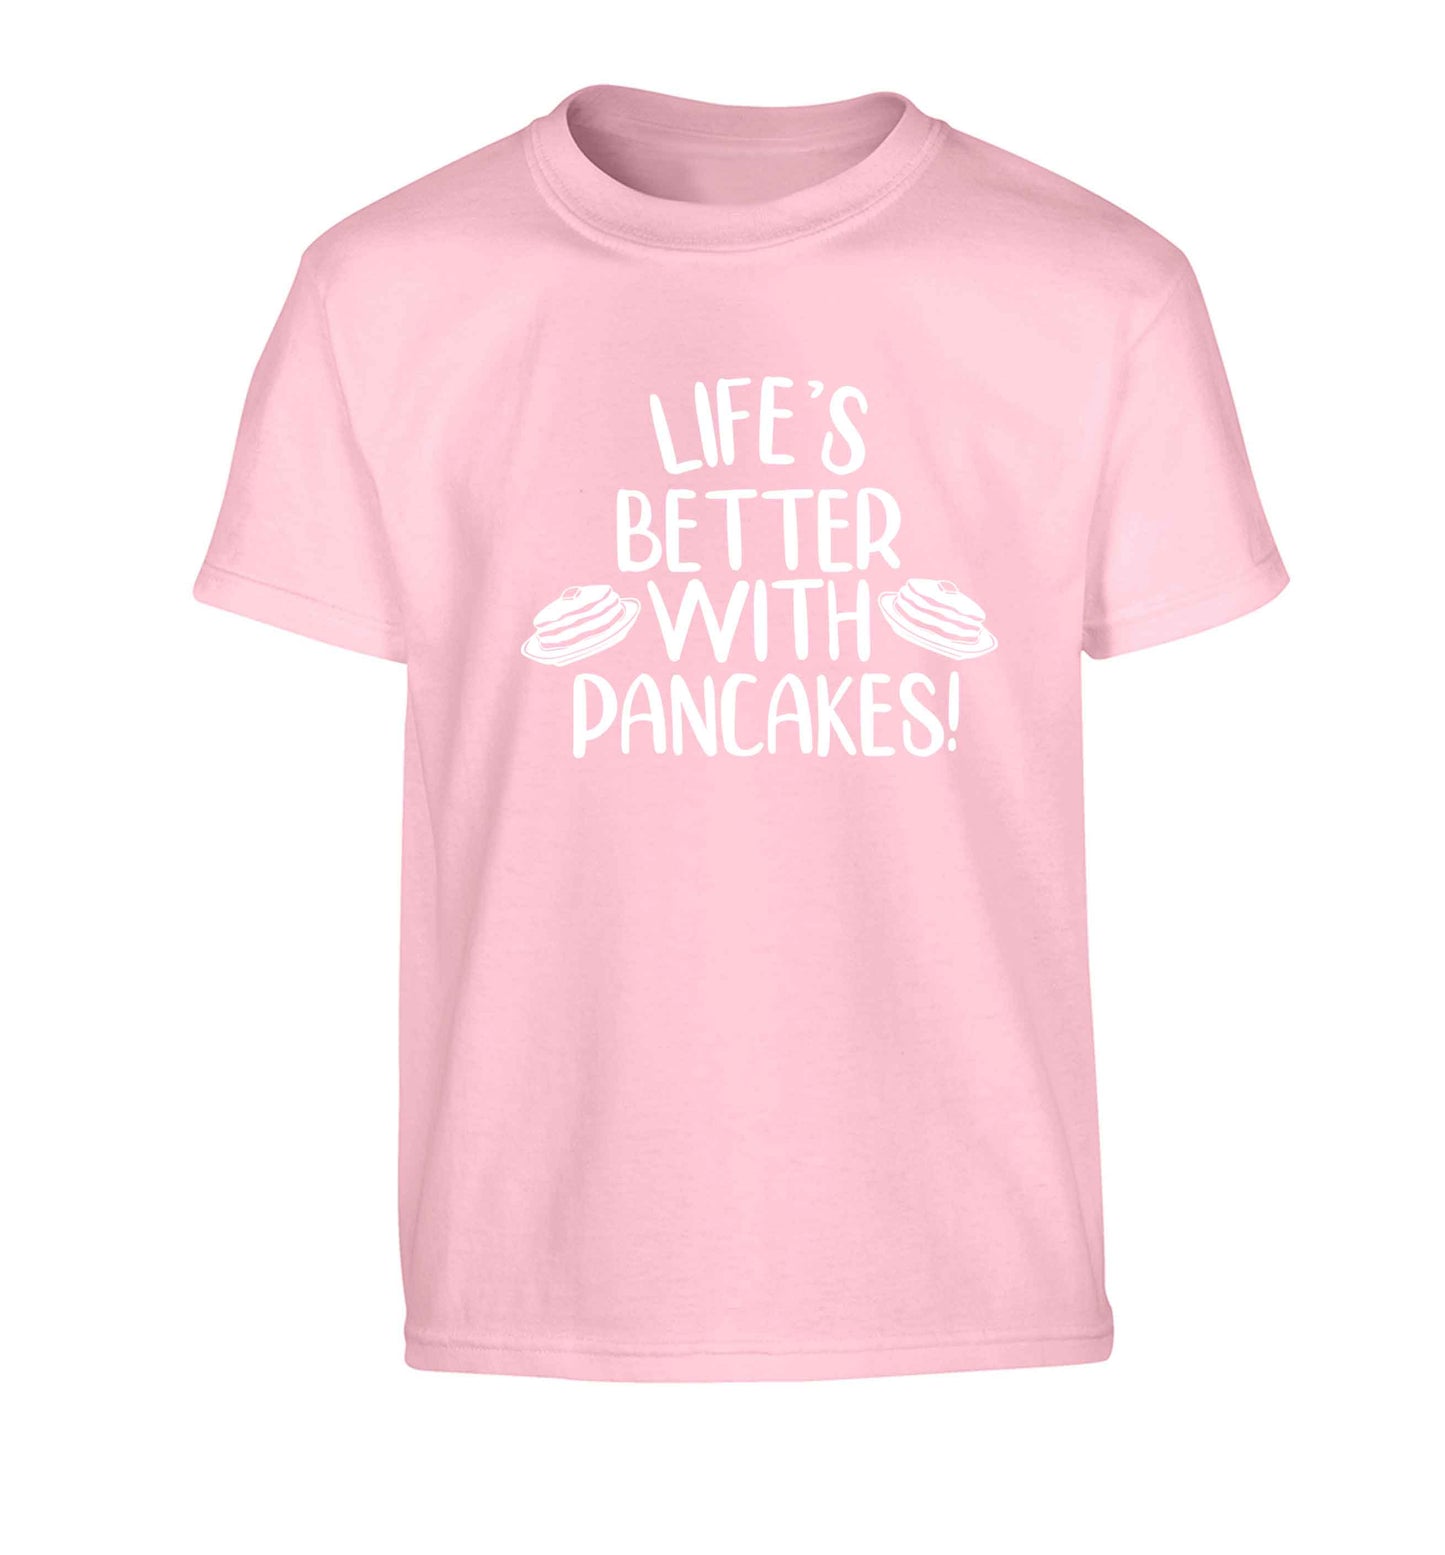 Life's better with pancakes Children's light pink Tshirt 12-13 Years